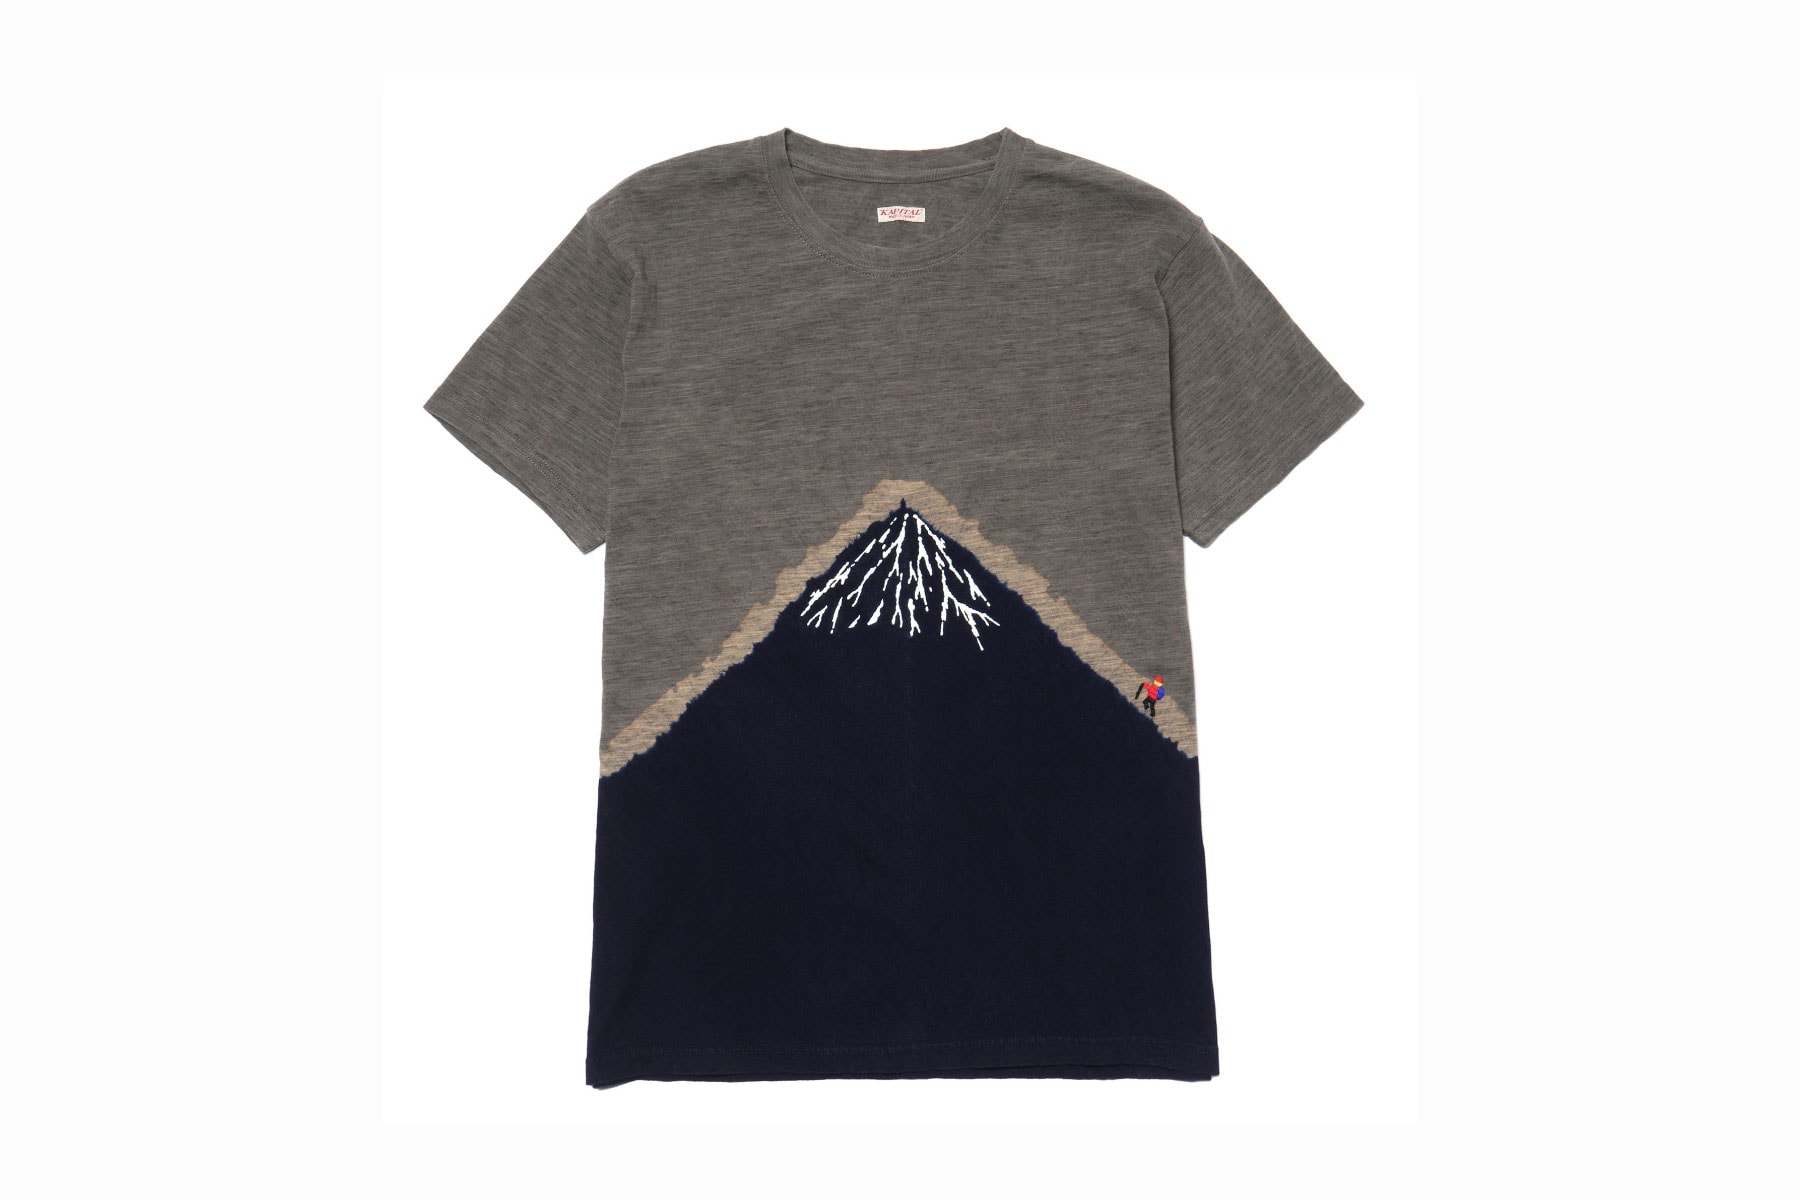 KAPITAL Indigo-Dyed Graphic T-Shirt Collection release purchase available now